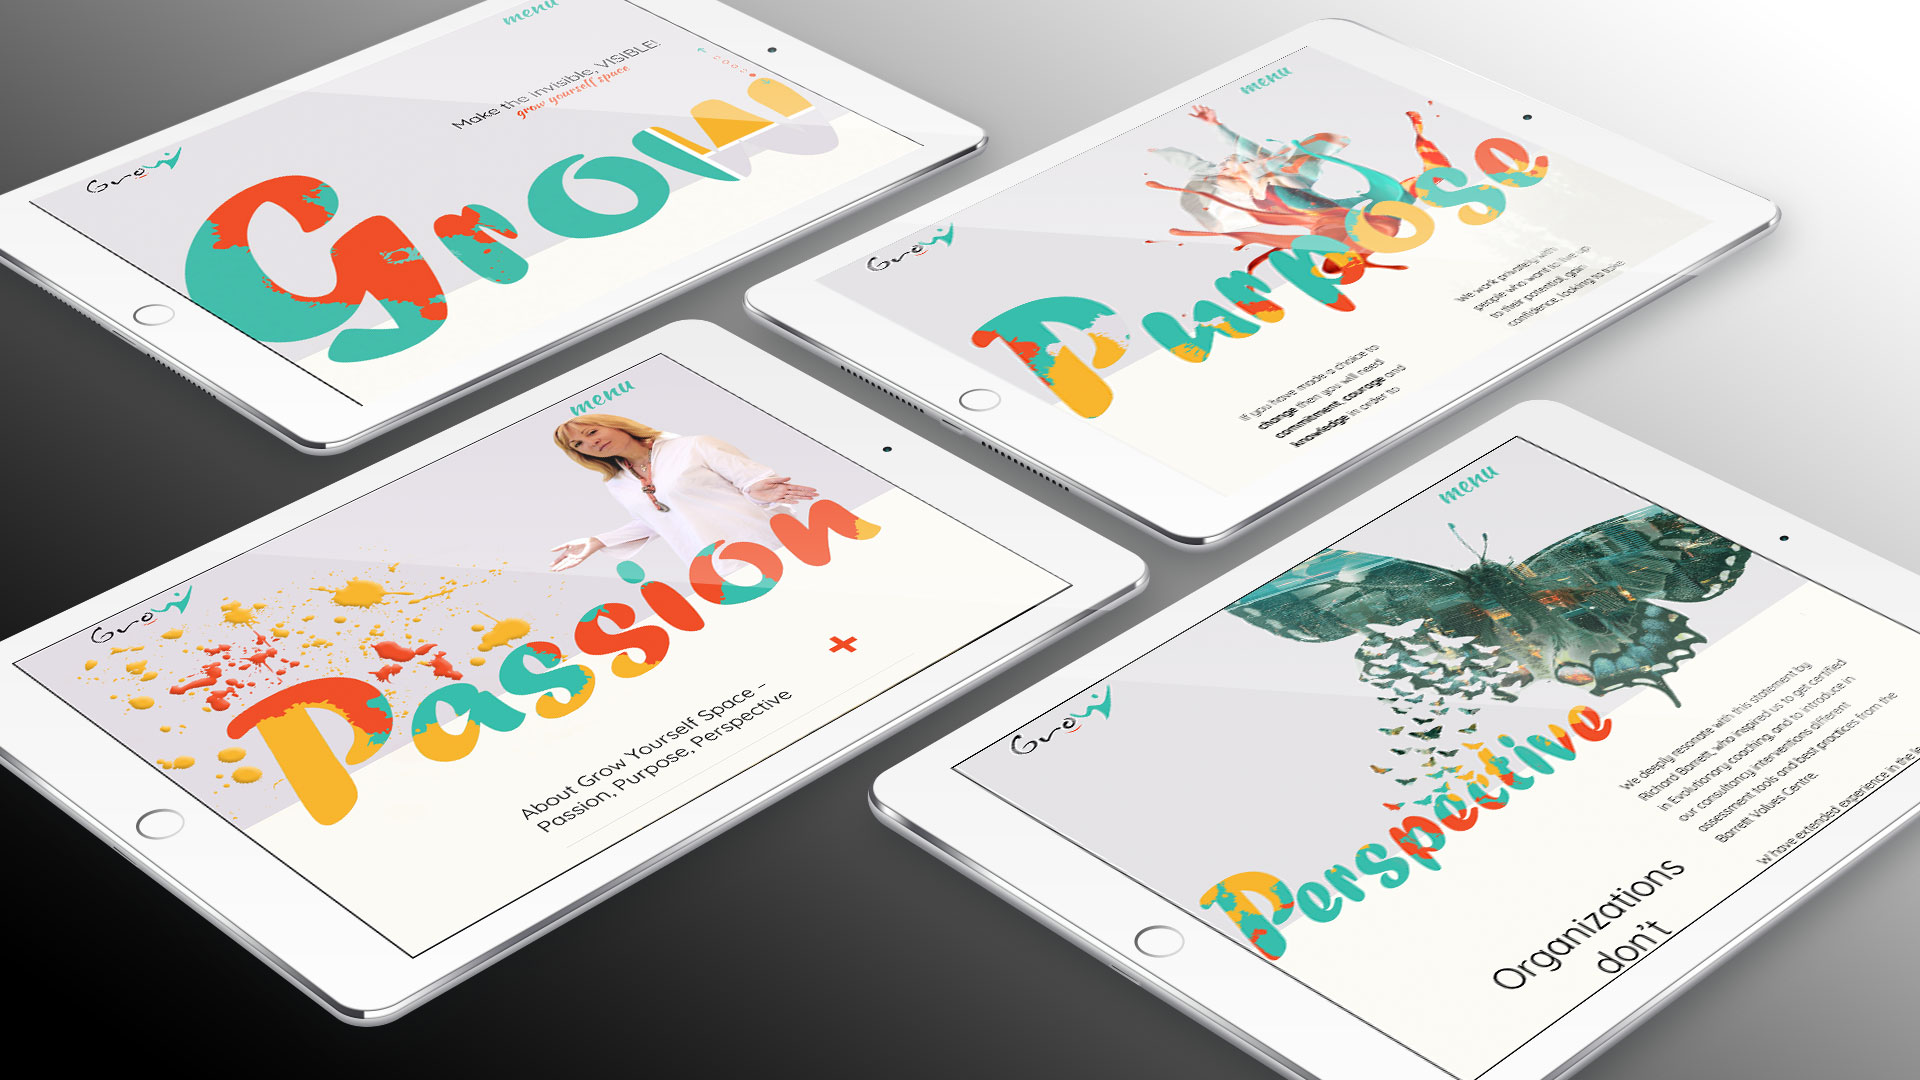 This image by PixelUp exhibits four iPads set against a dark grey linear gradient backdrop. Each iPad showcases a webpage featuring striking custom typography illustrating the words 'Grow', 'Passion', 'Purpose' and 'Perspective' in vibrant shades of orange, red, and teal against a light purple background. These typographic designs serve as banner images for the main service pages of Grow Yourself Space Project, a custom website design for evolutionary coaches by PixelUp.